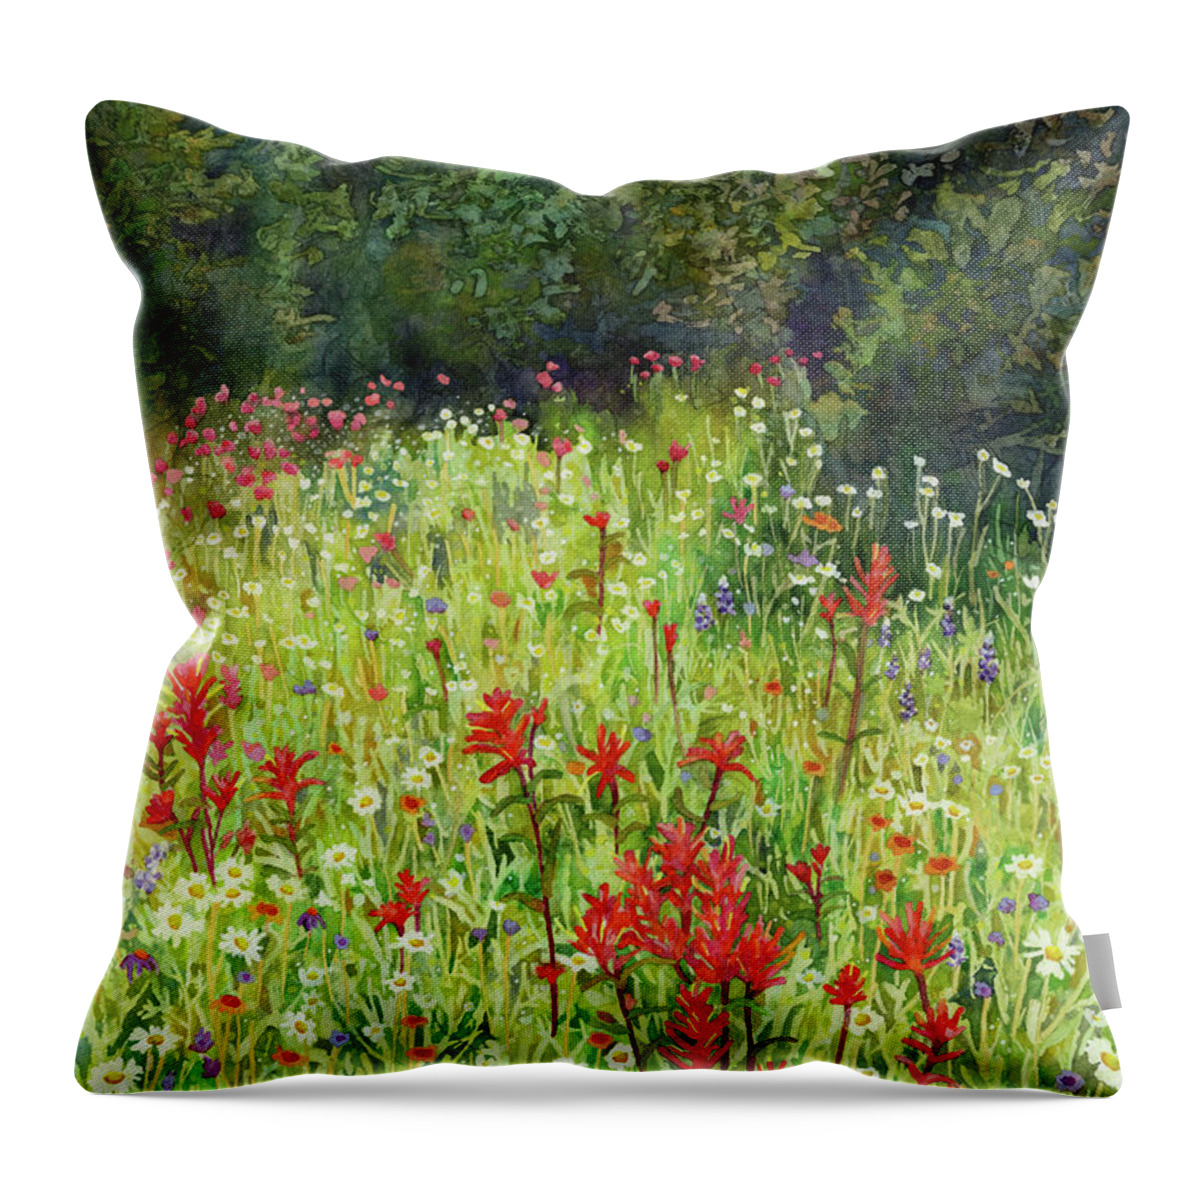 Bluebonnet Throw Pillow featuring the painting Blooming Field by Hailey E Herrera